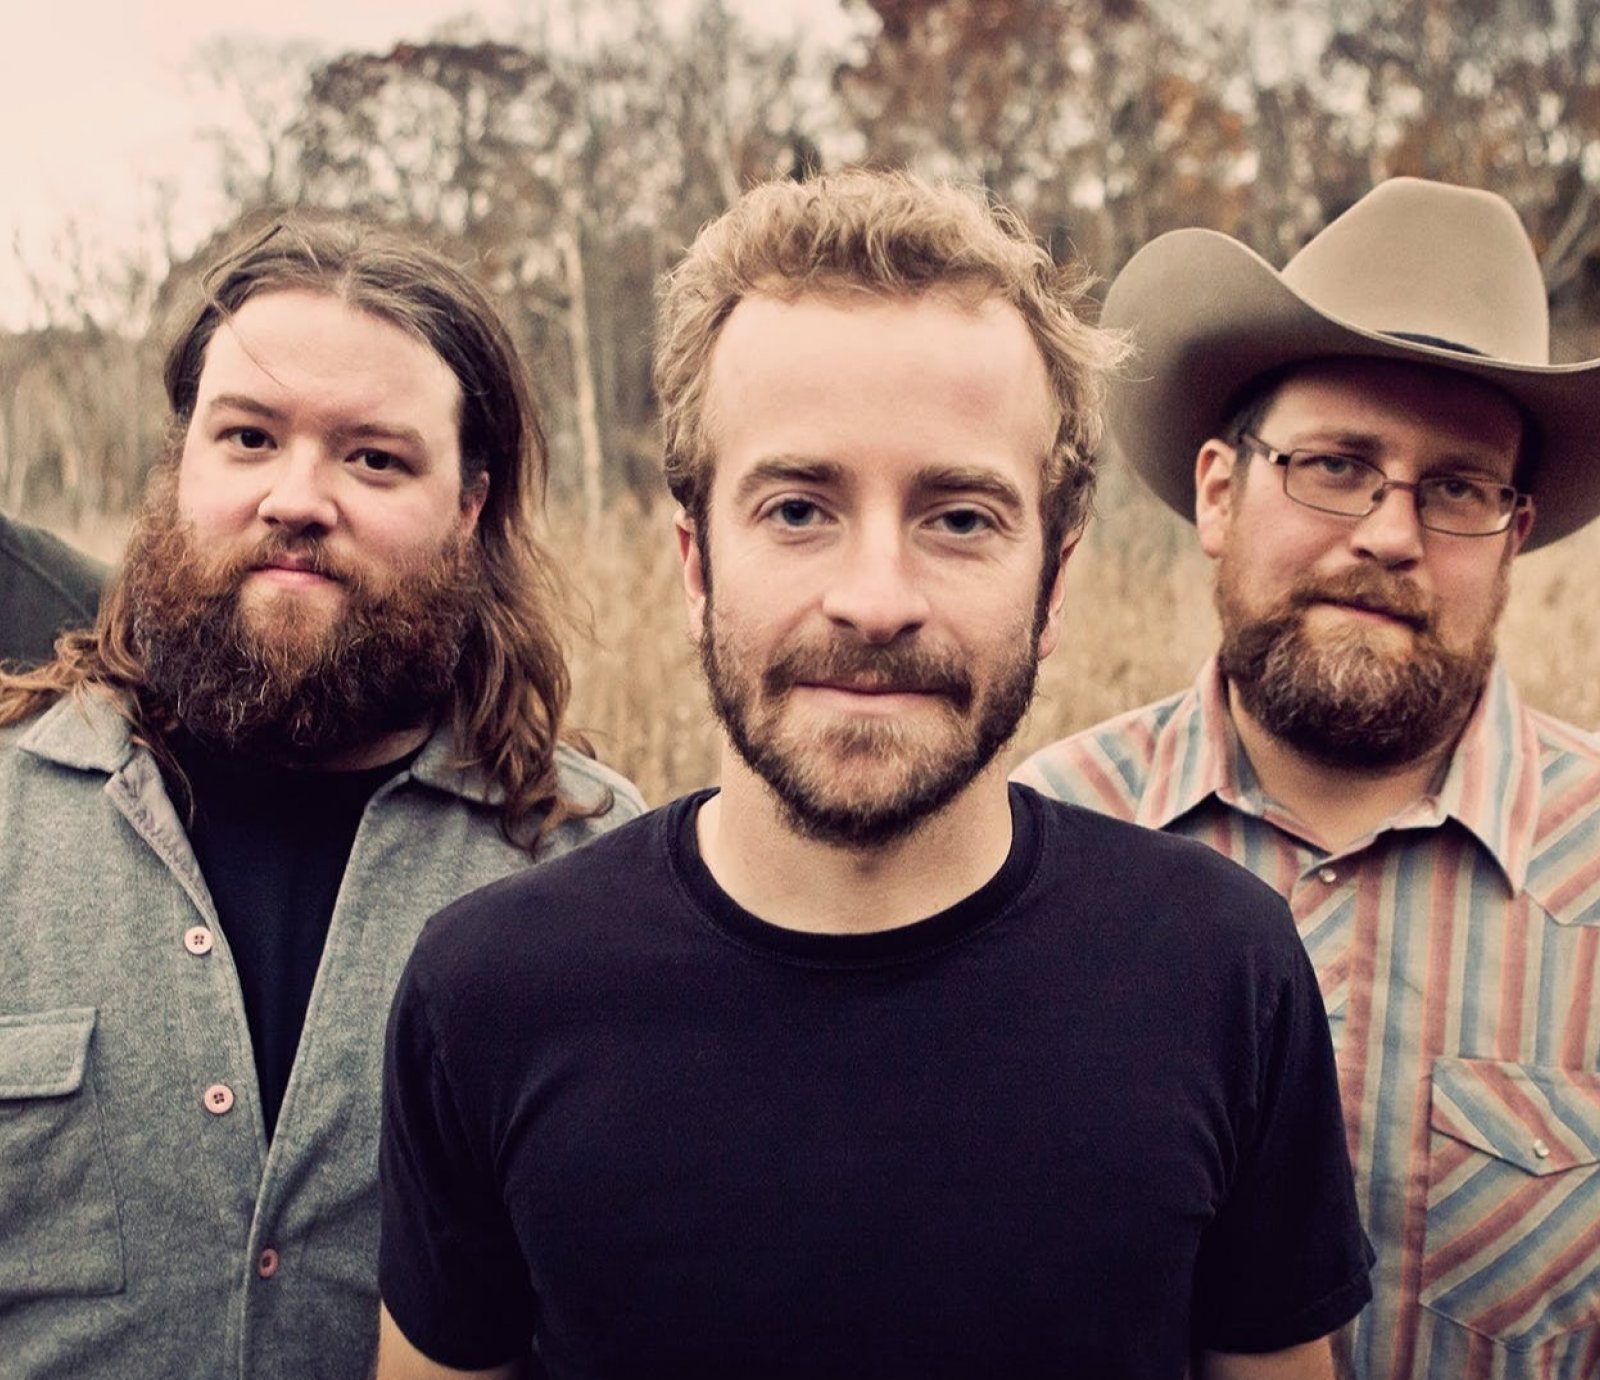 Trampled By Turtles